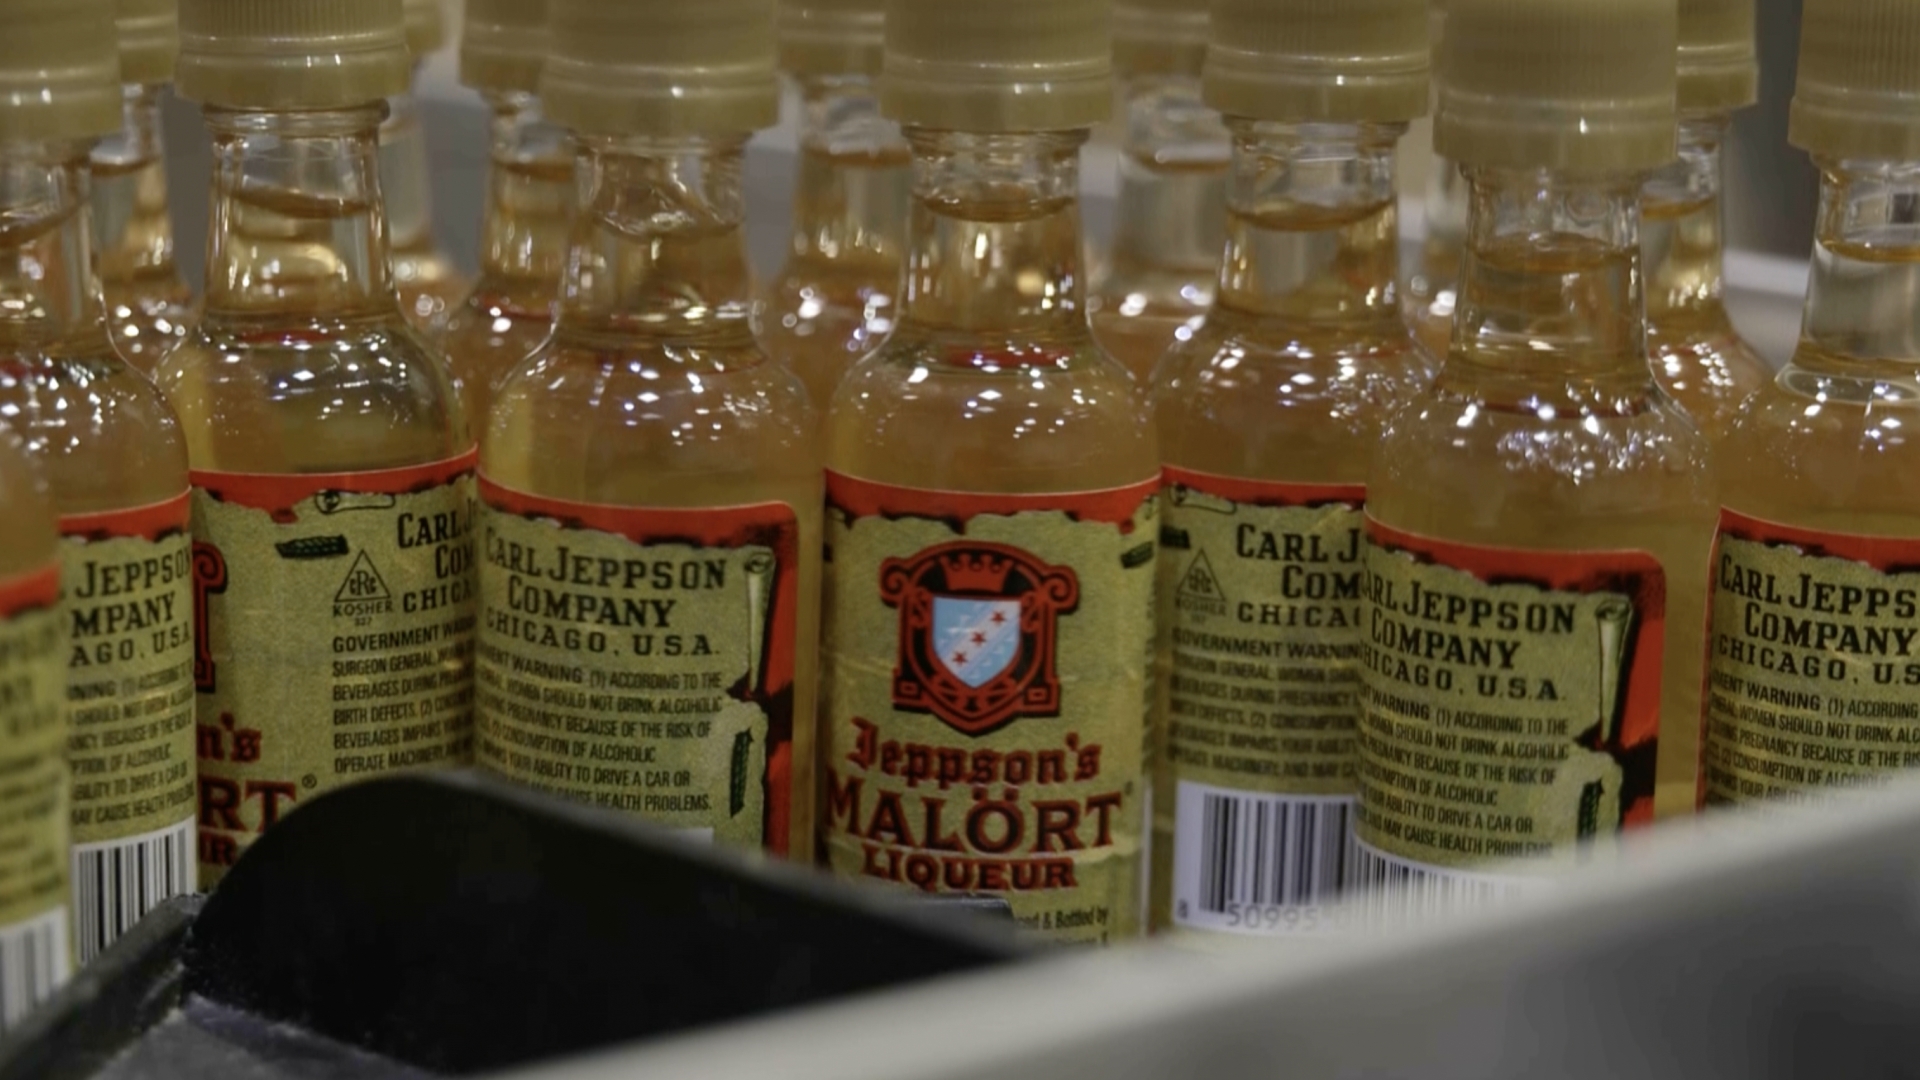 Never Try Malort 